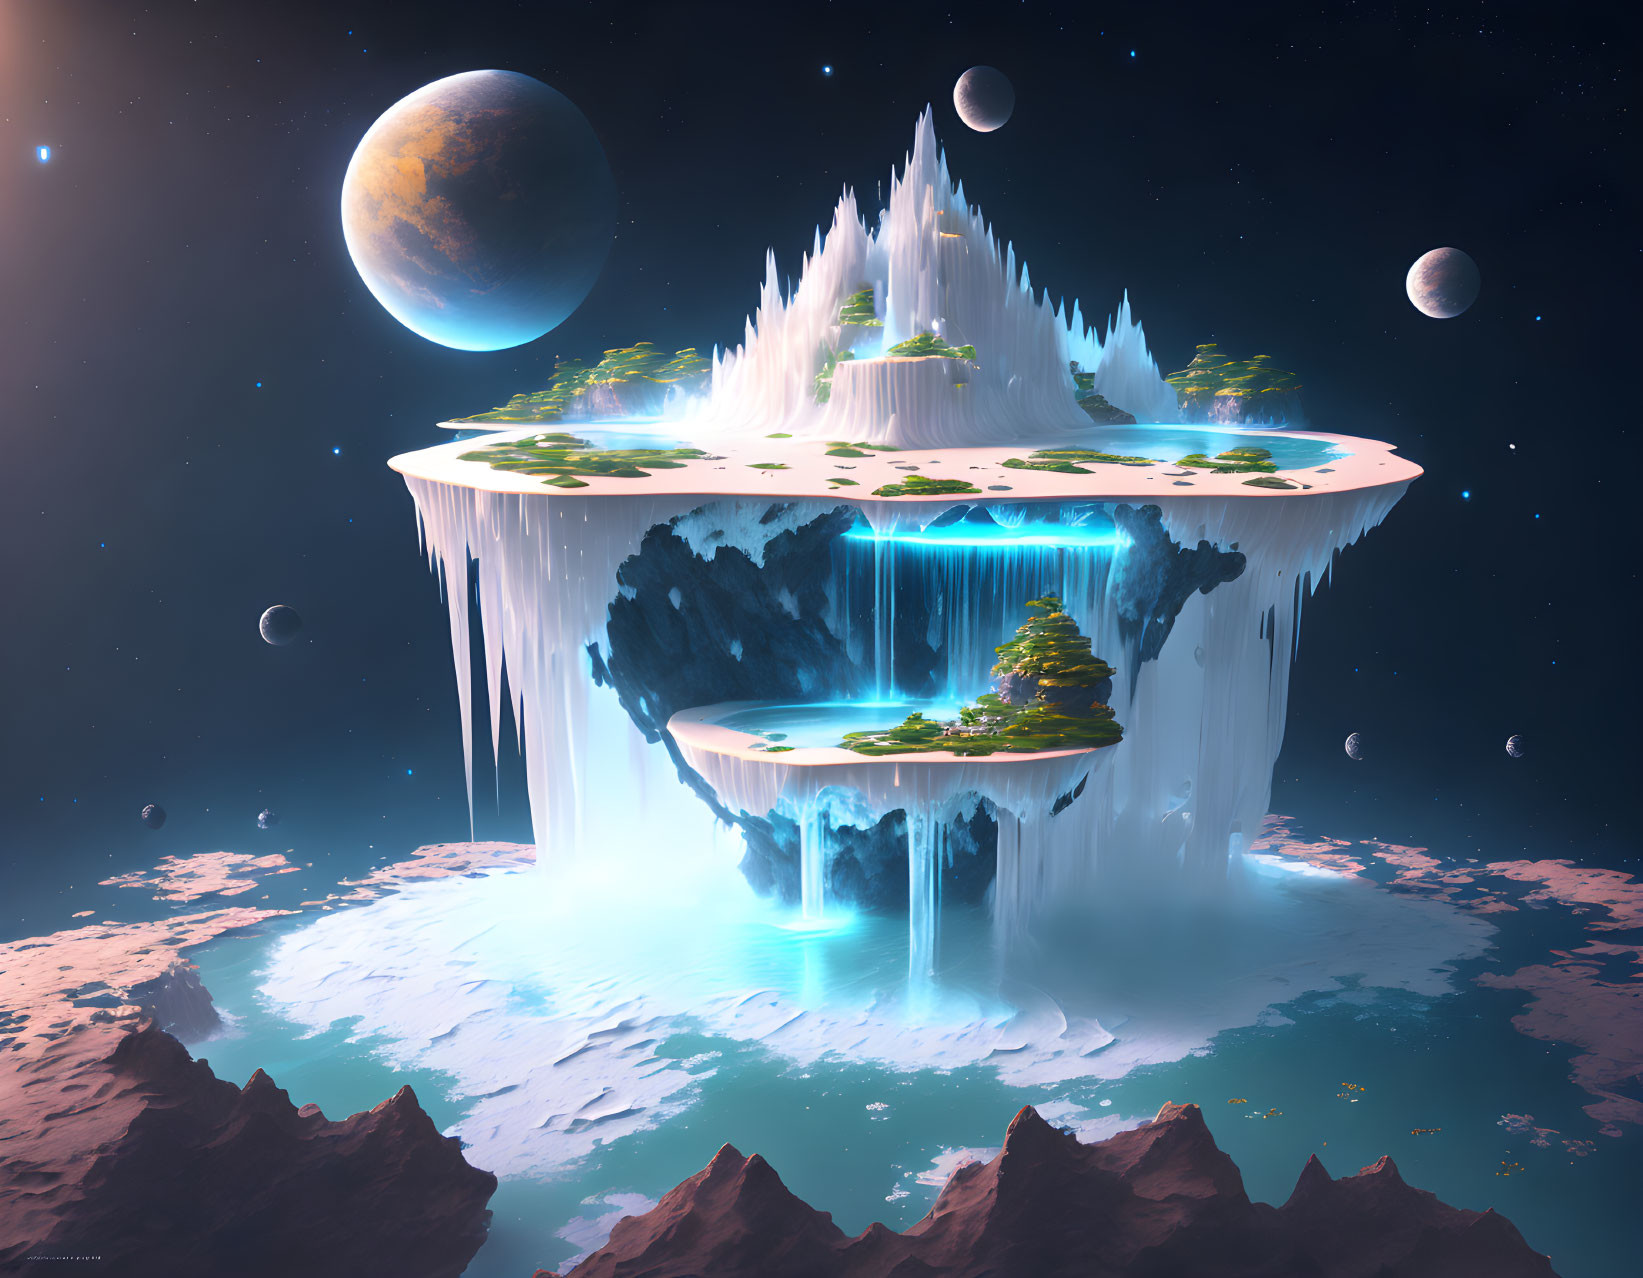 Fantastical floating island with waterfalls and trees against space backdrop